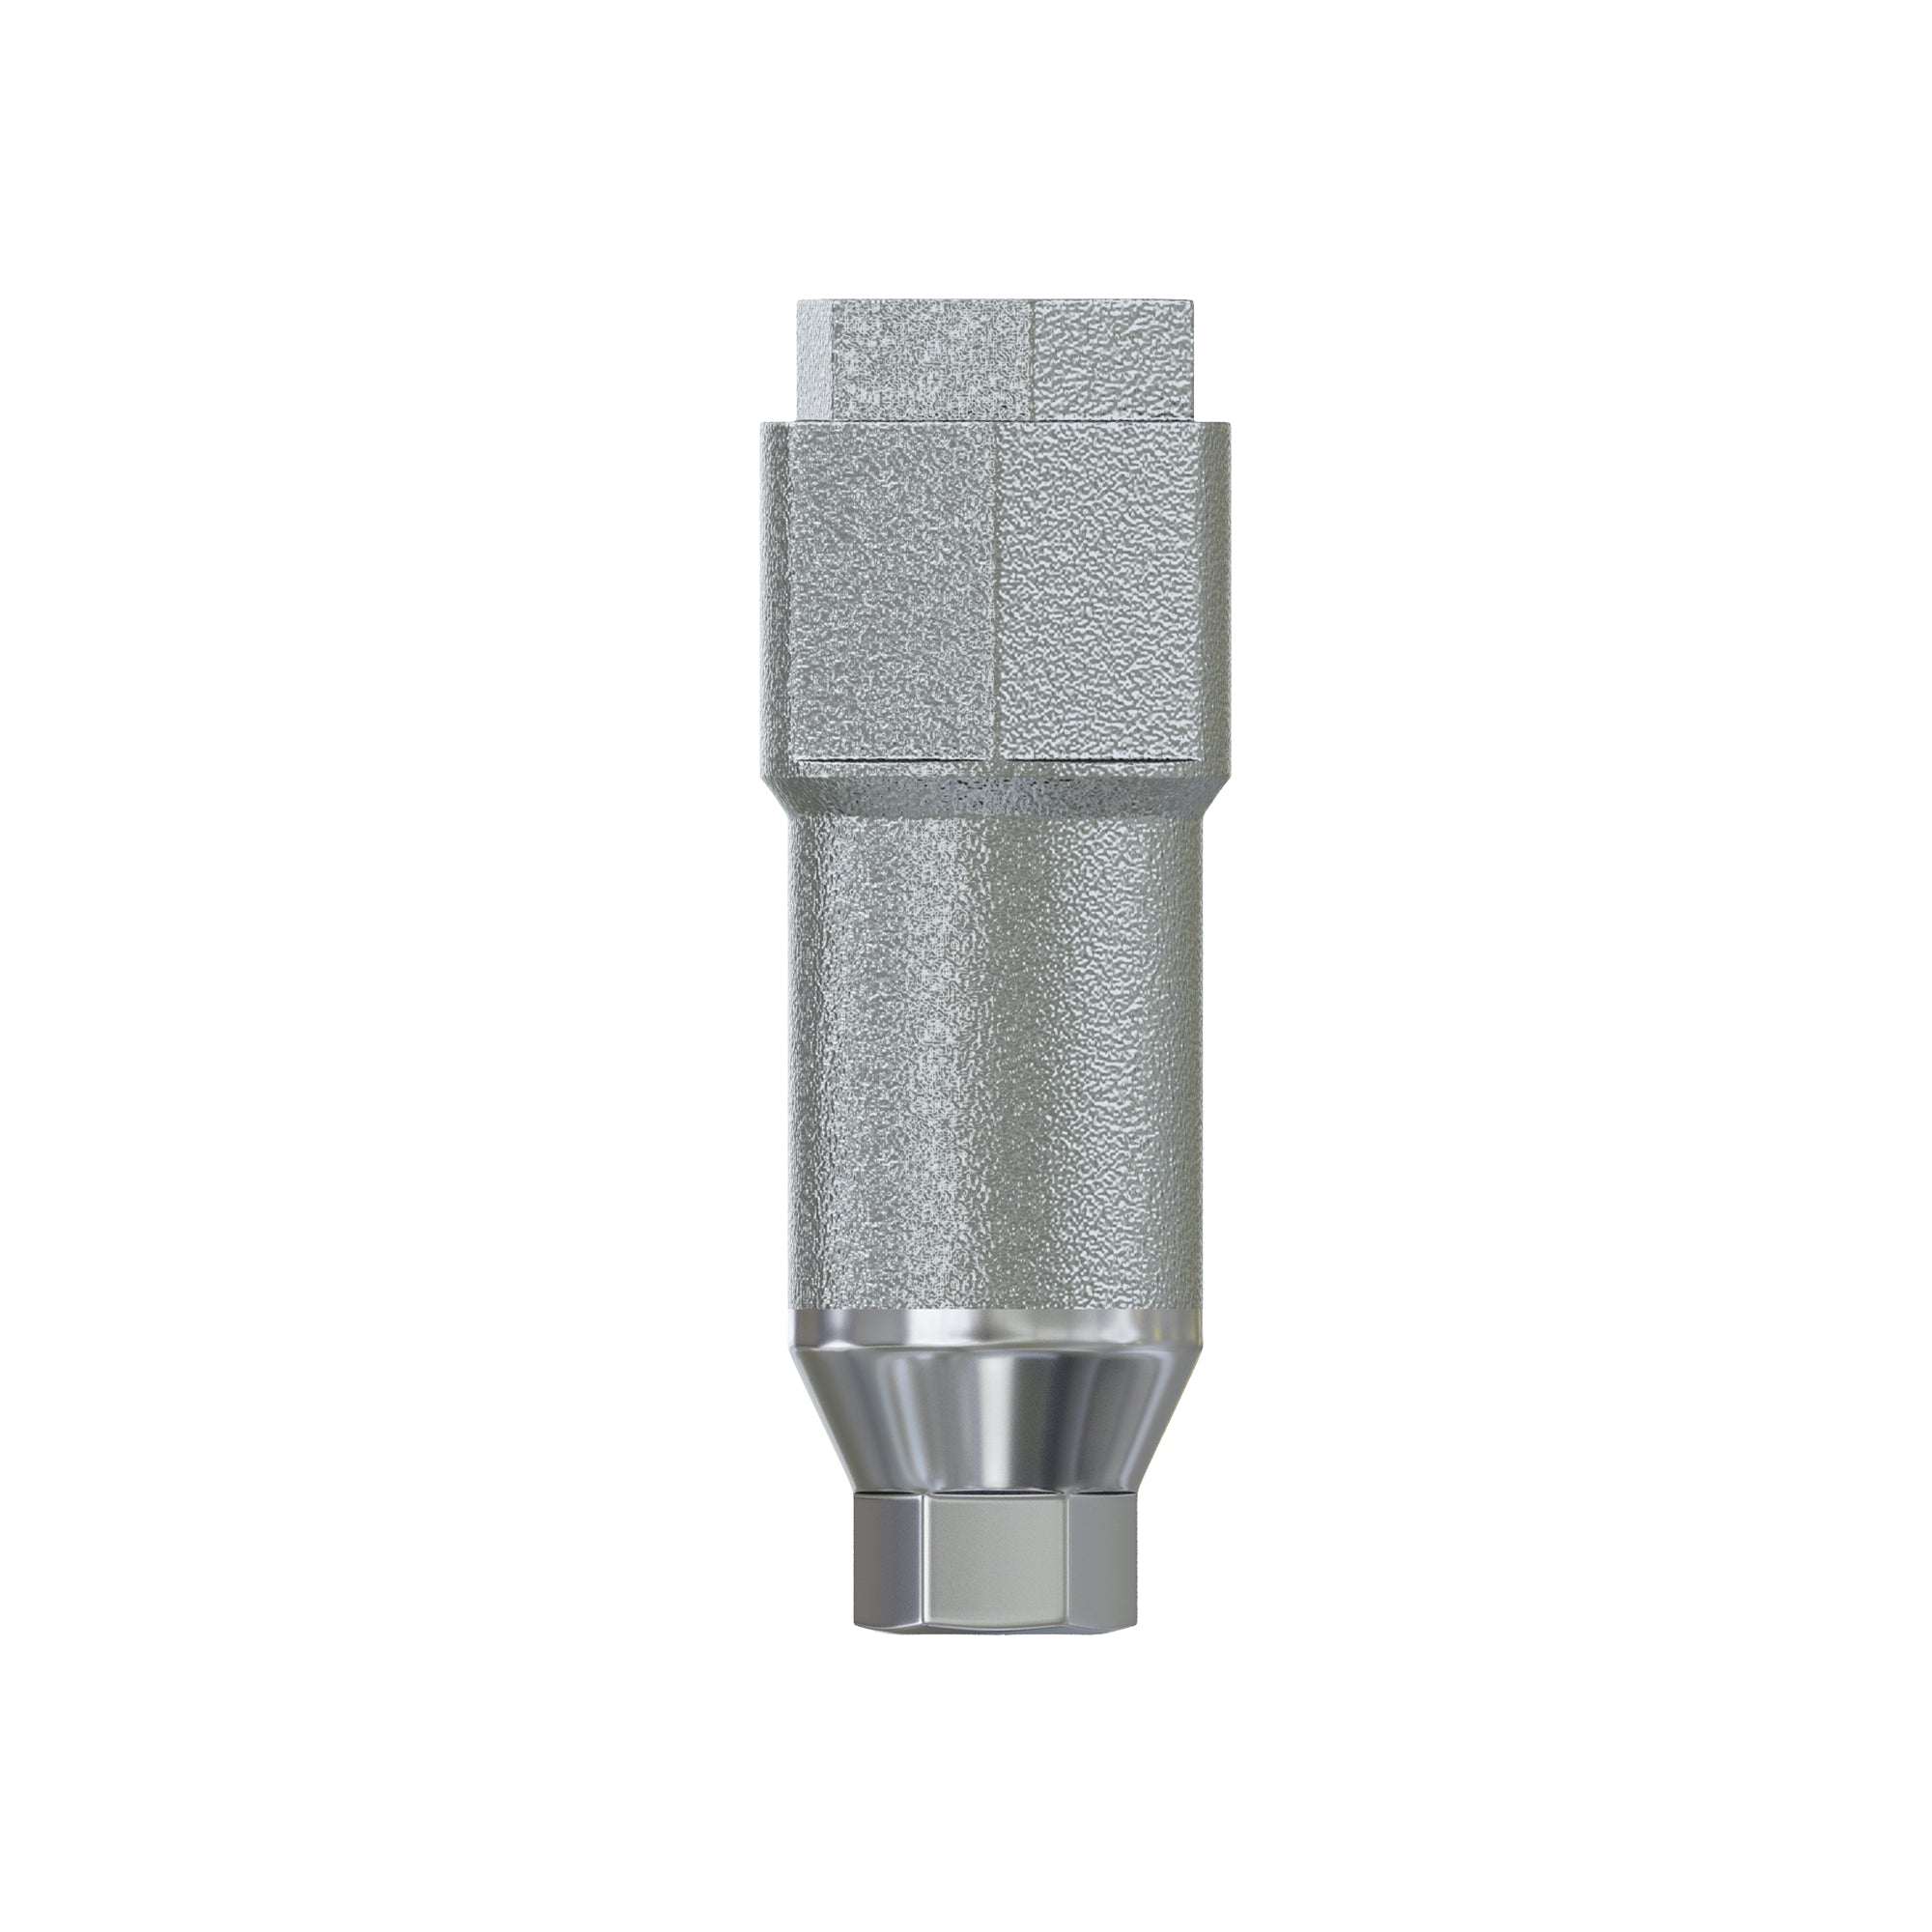 DSI Titanium Scan Post Body Conical Connection 3.5mm - Conical Connection RP Ø4.3-5.0mm